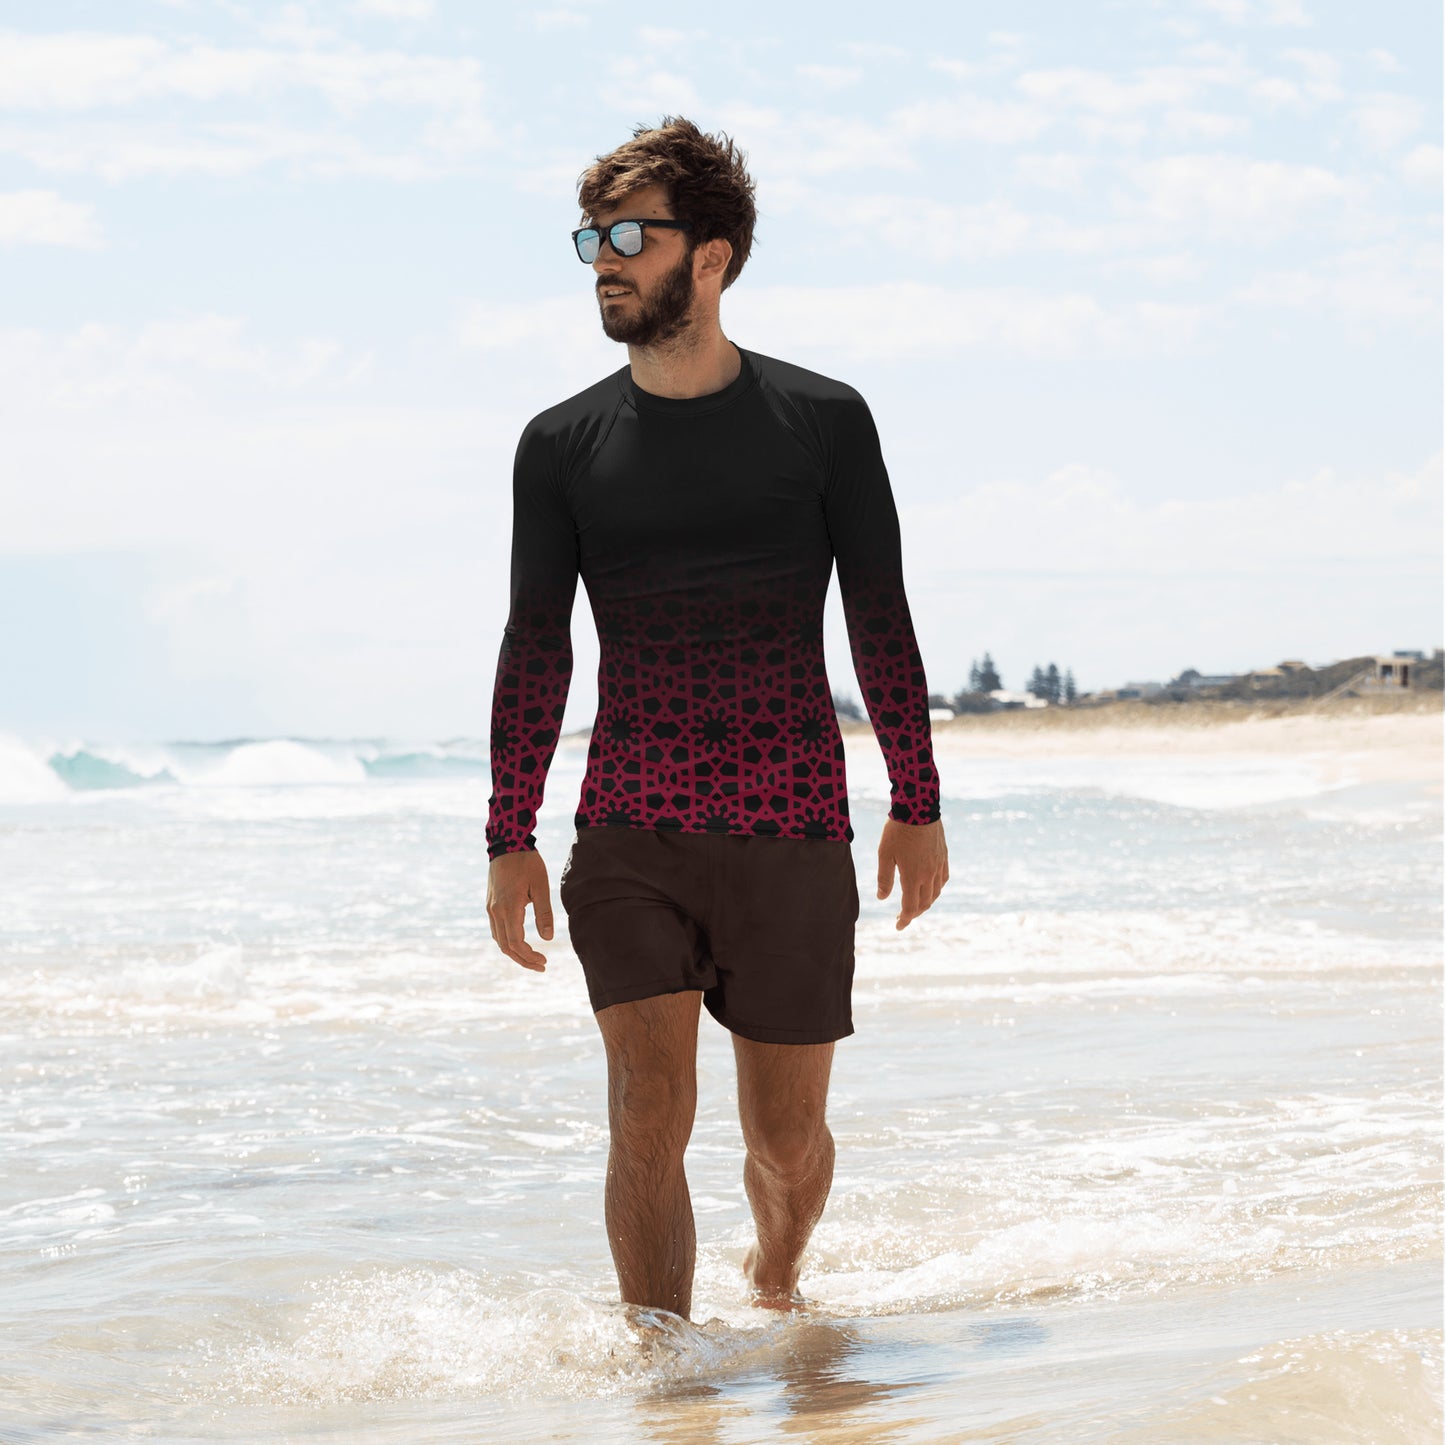 Men's Rash Guard - Geometric Ombre in Black and Red